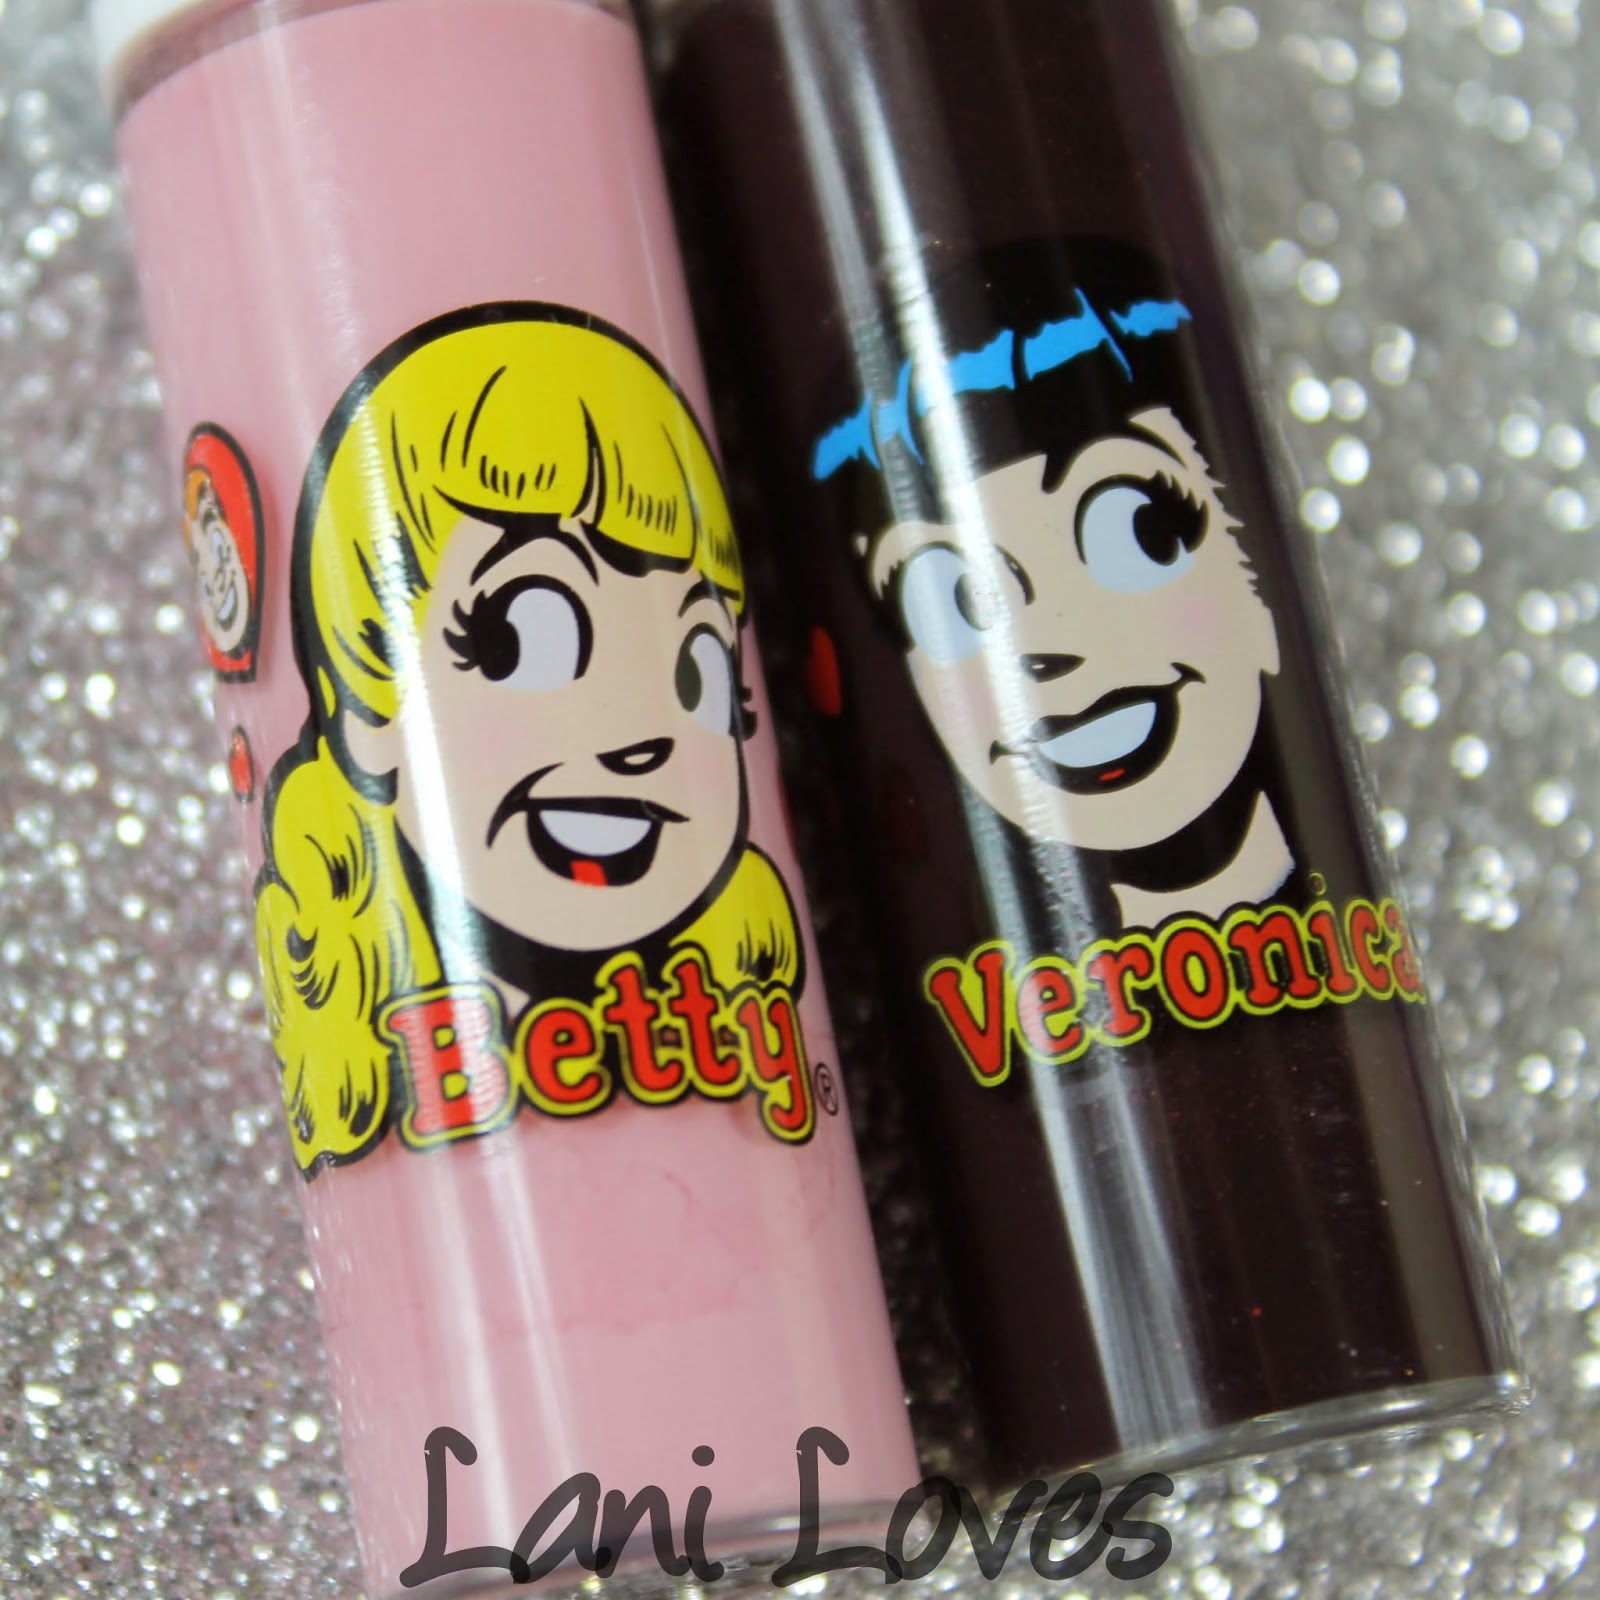 MAC Monday: Archie's Girls - Stay Sweet and Feelin' So Good Lipglass Swatches & Review